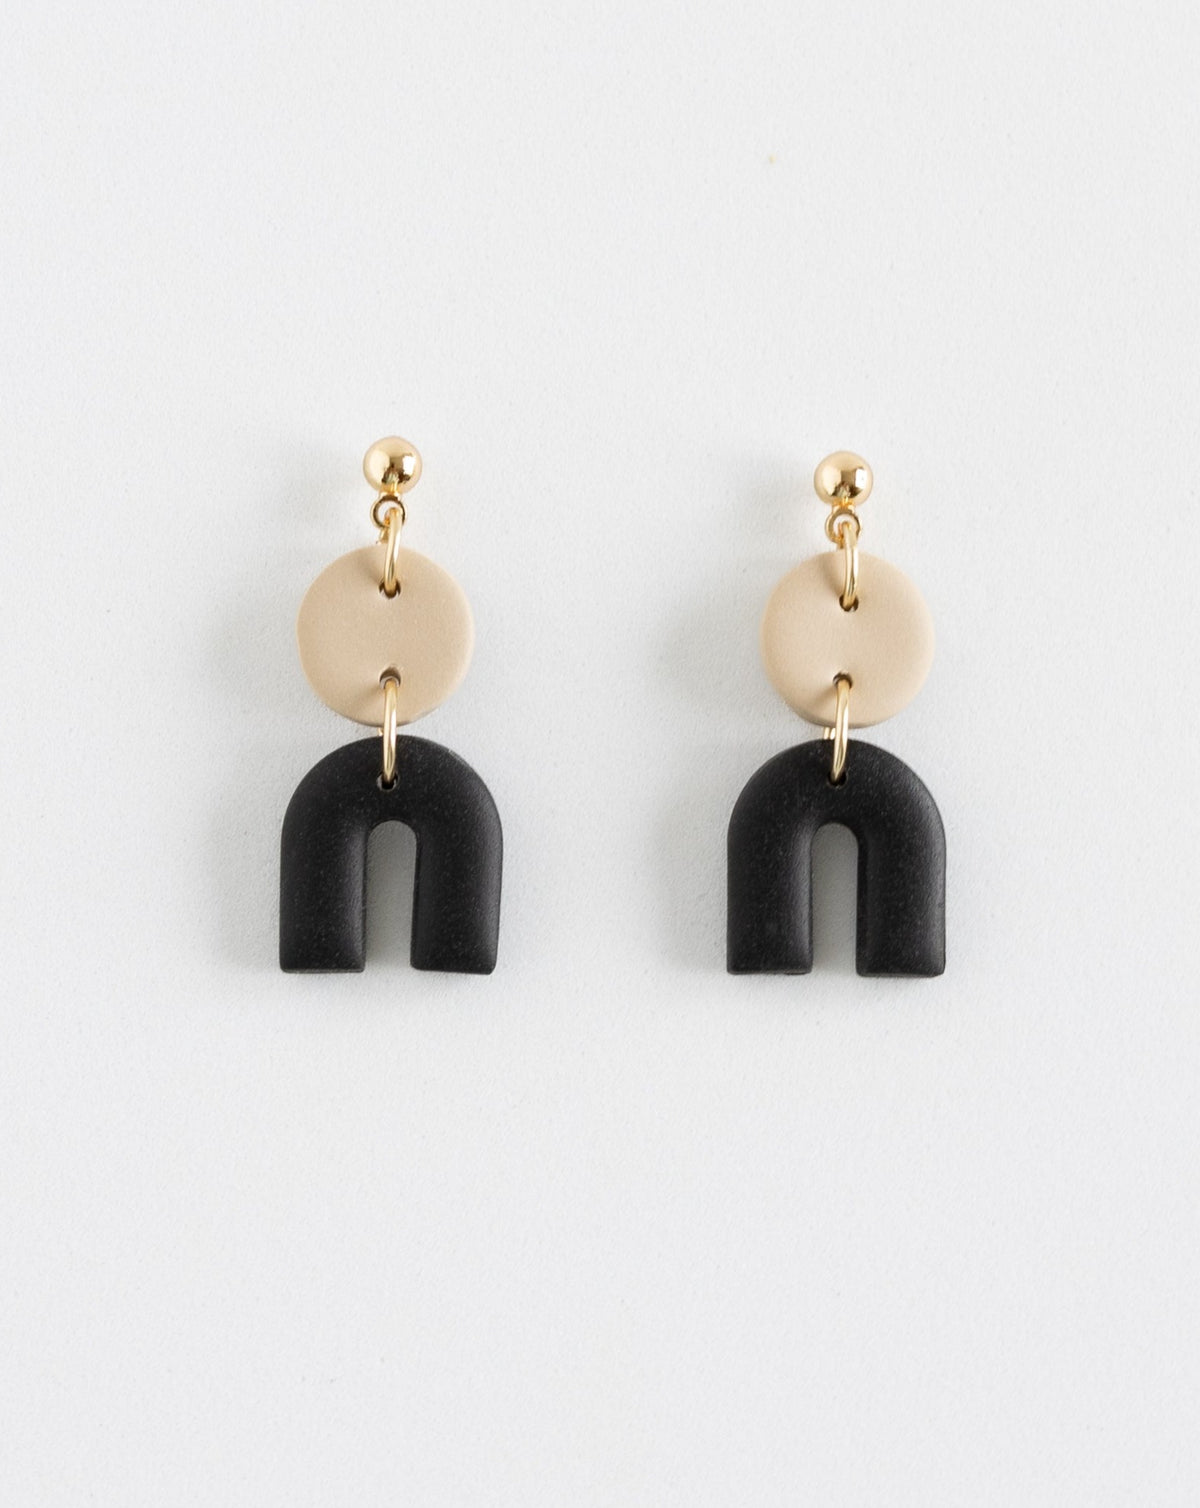 Tiny Arch earrings in two part of Beige and black clay parts with gold plated Ball studs, front view.